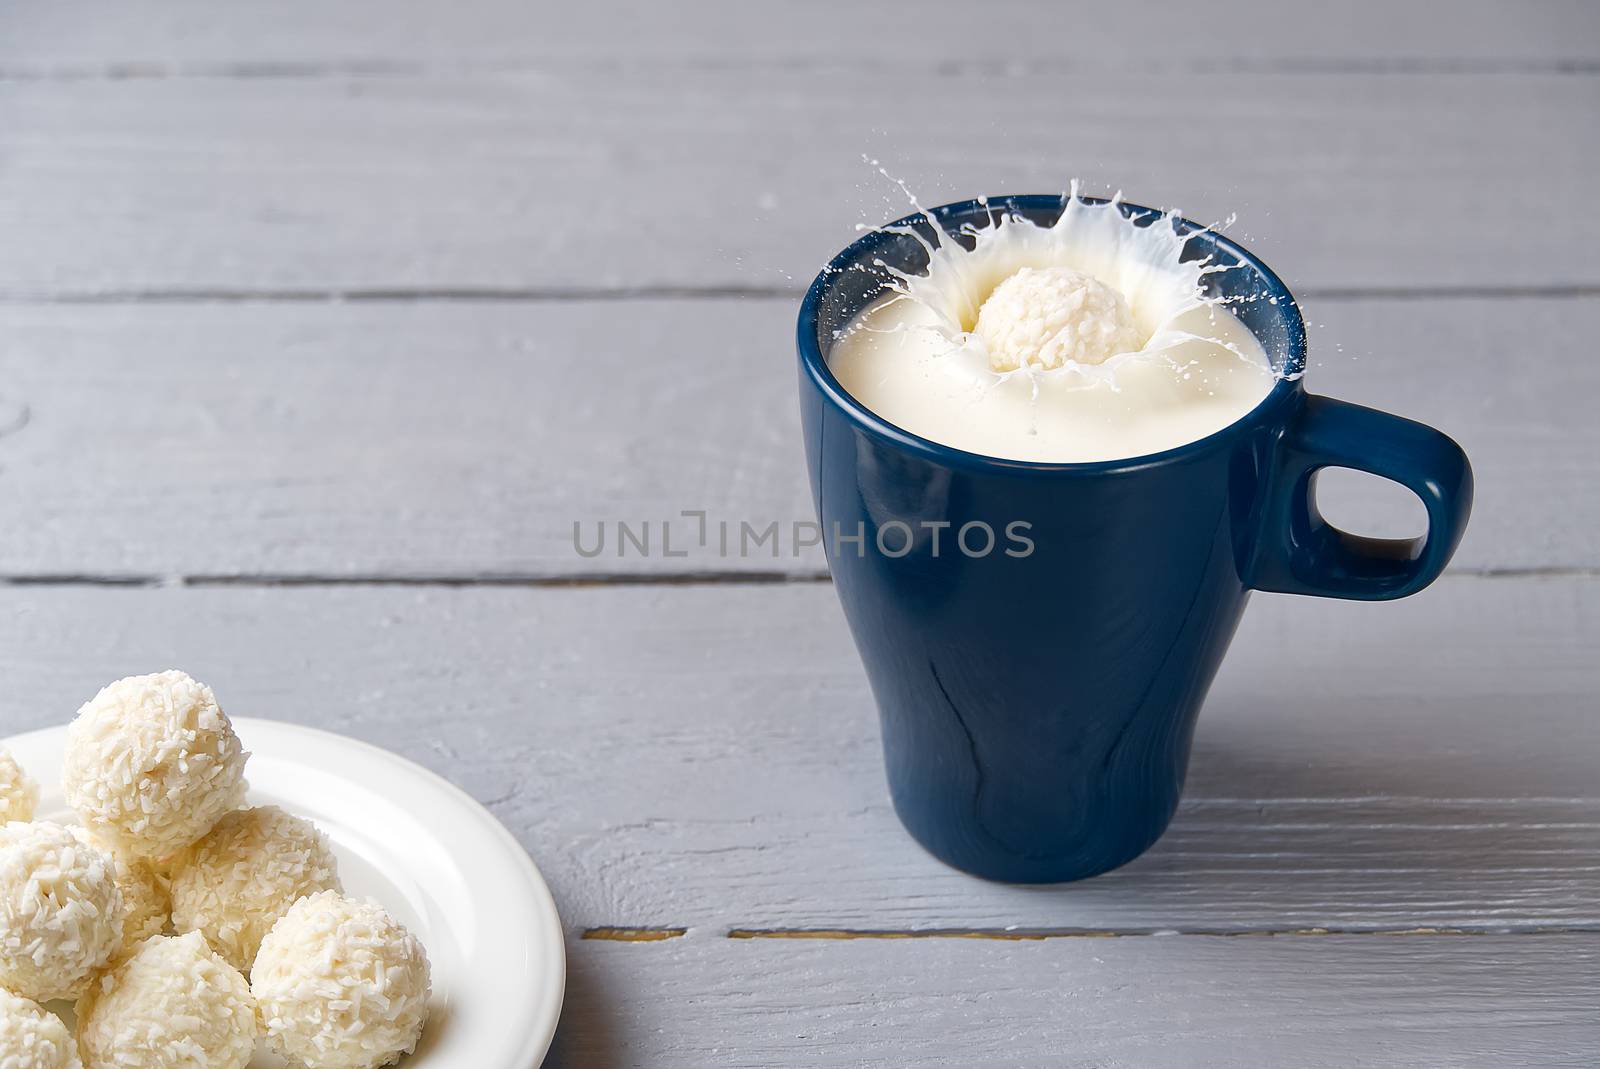 coconut cookies fell into a blue mug of milk. splashes of milk in a mug caused by a drop of coconut truffle. by PhotoTime